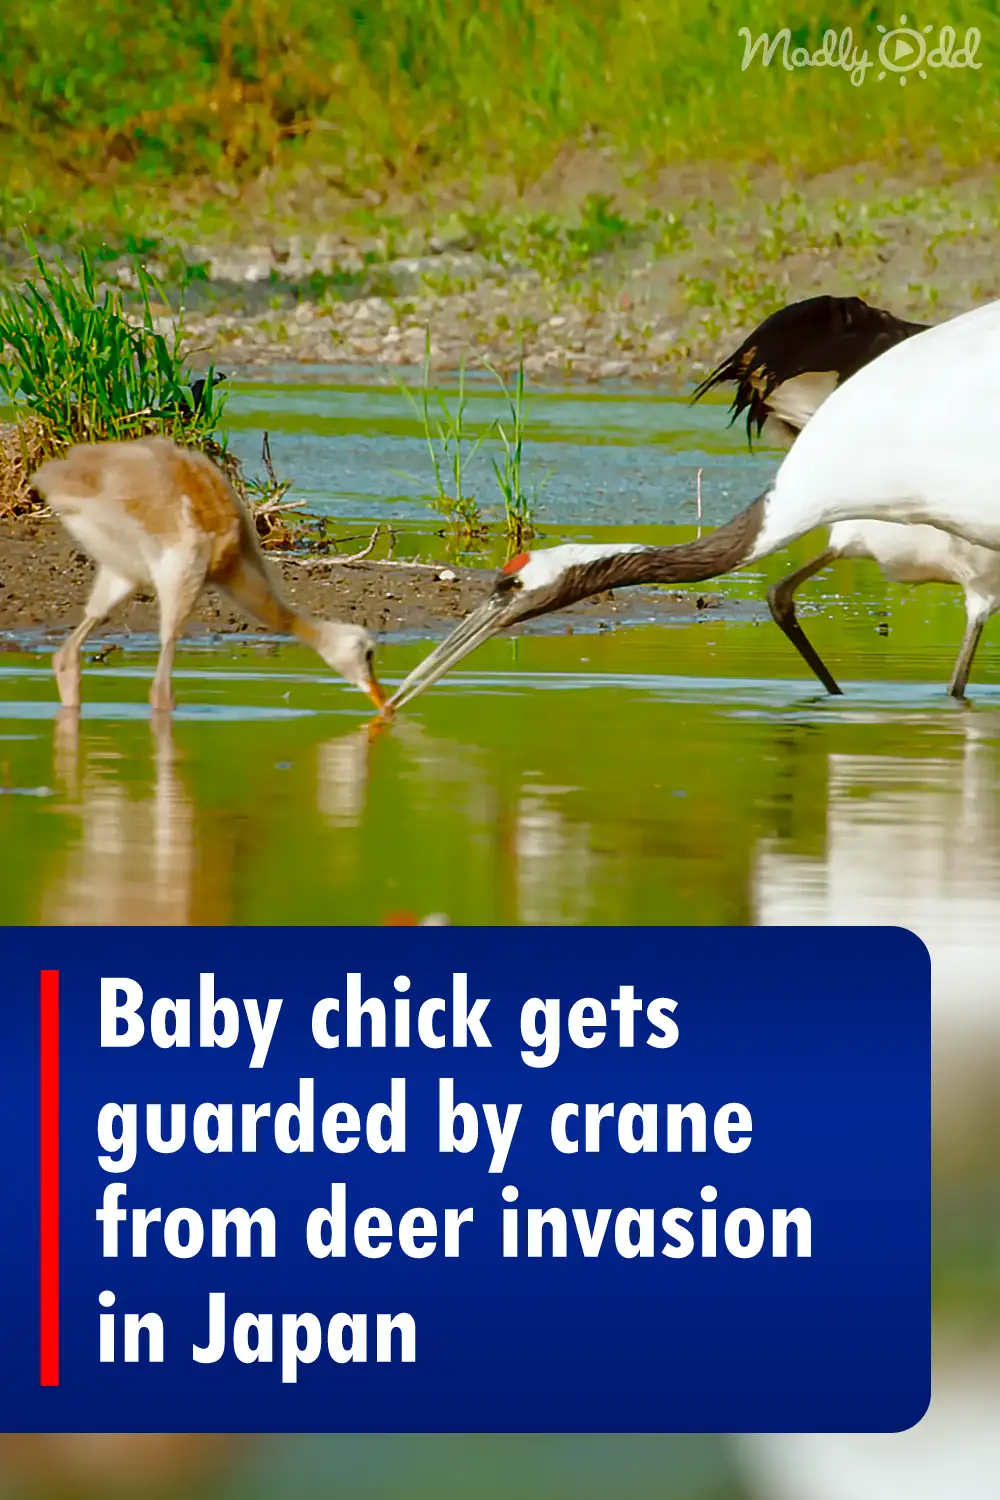 Baby chick gets guarded by crane from deer invasion in Japan